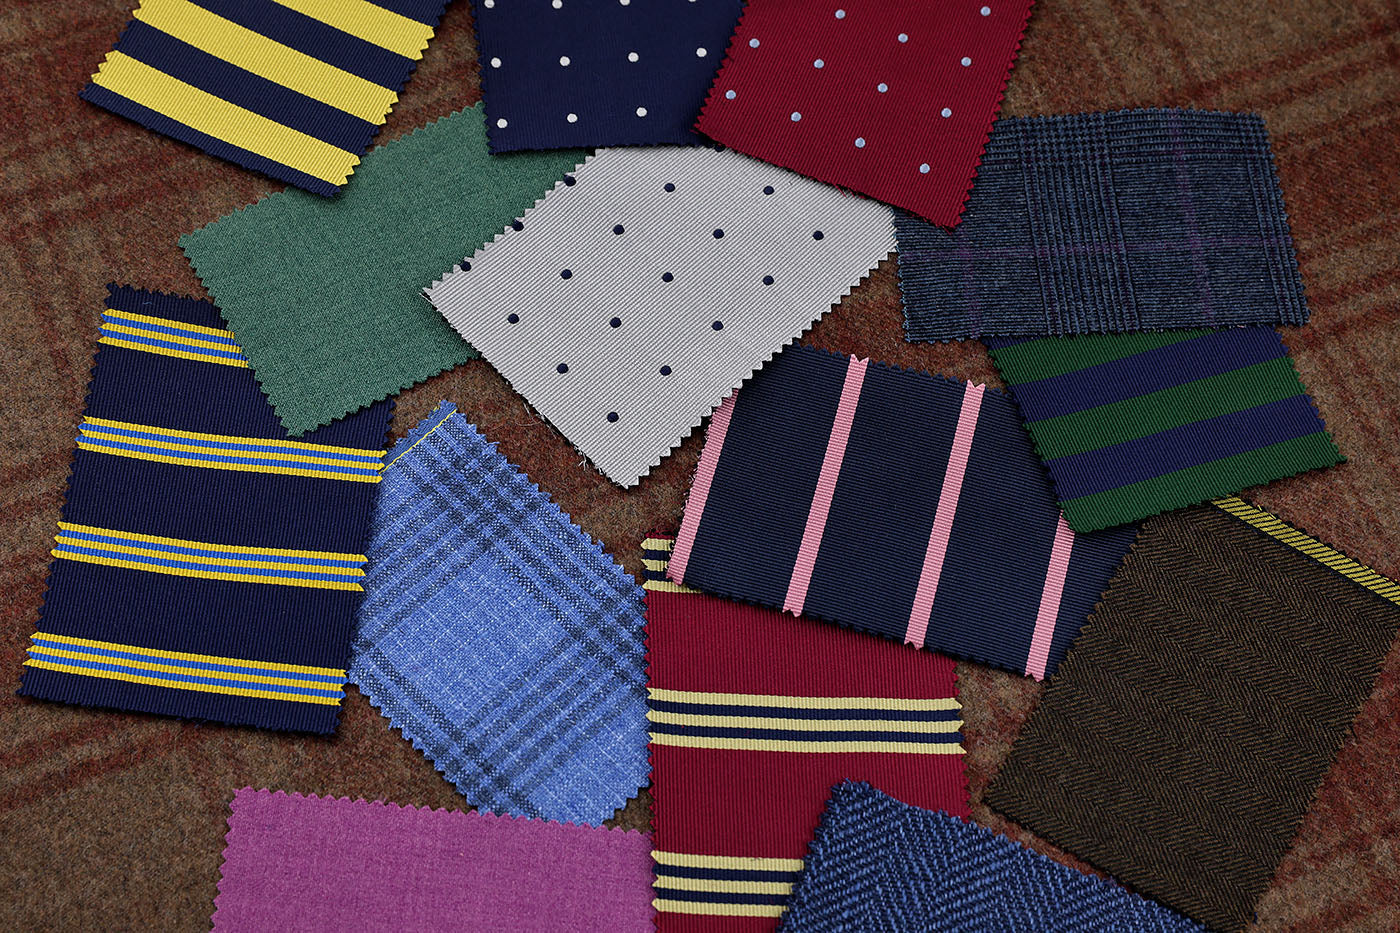 Shibumi bespoke ties - made to your specifications